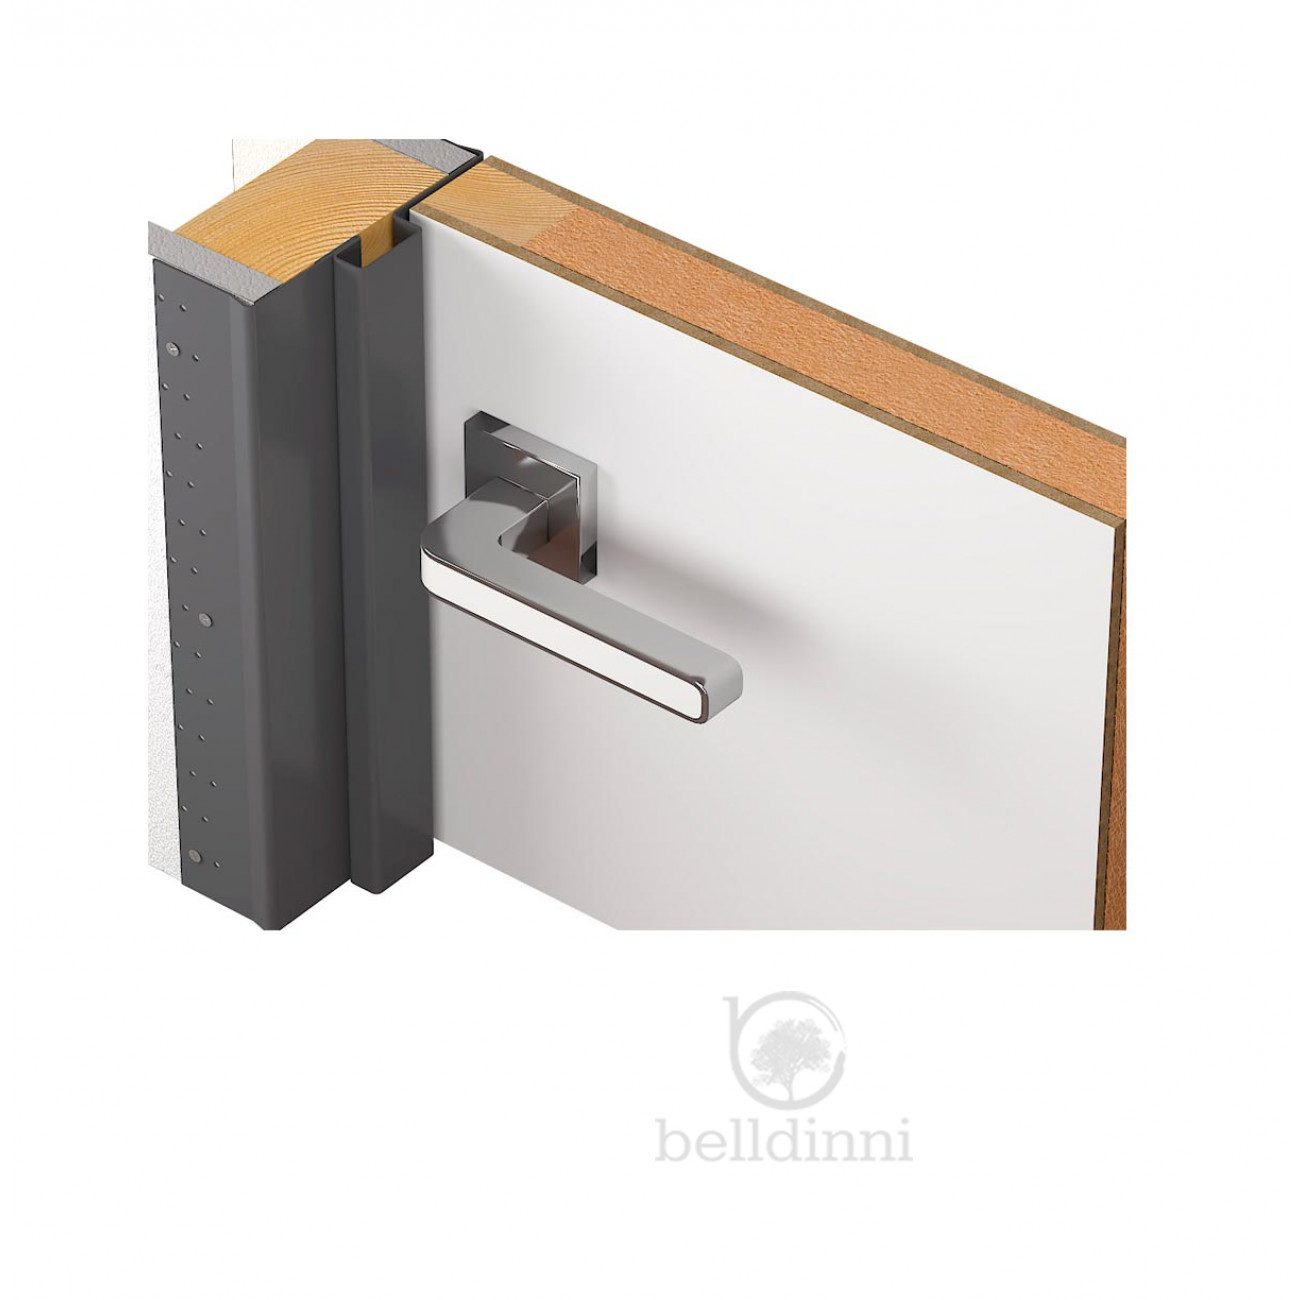 Doors System Inswing / Outswing • Without Frame by Belldinni™